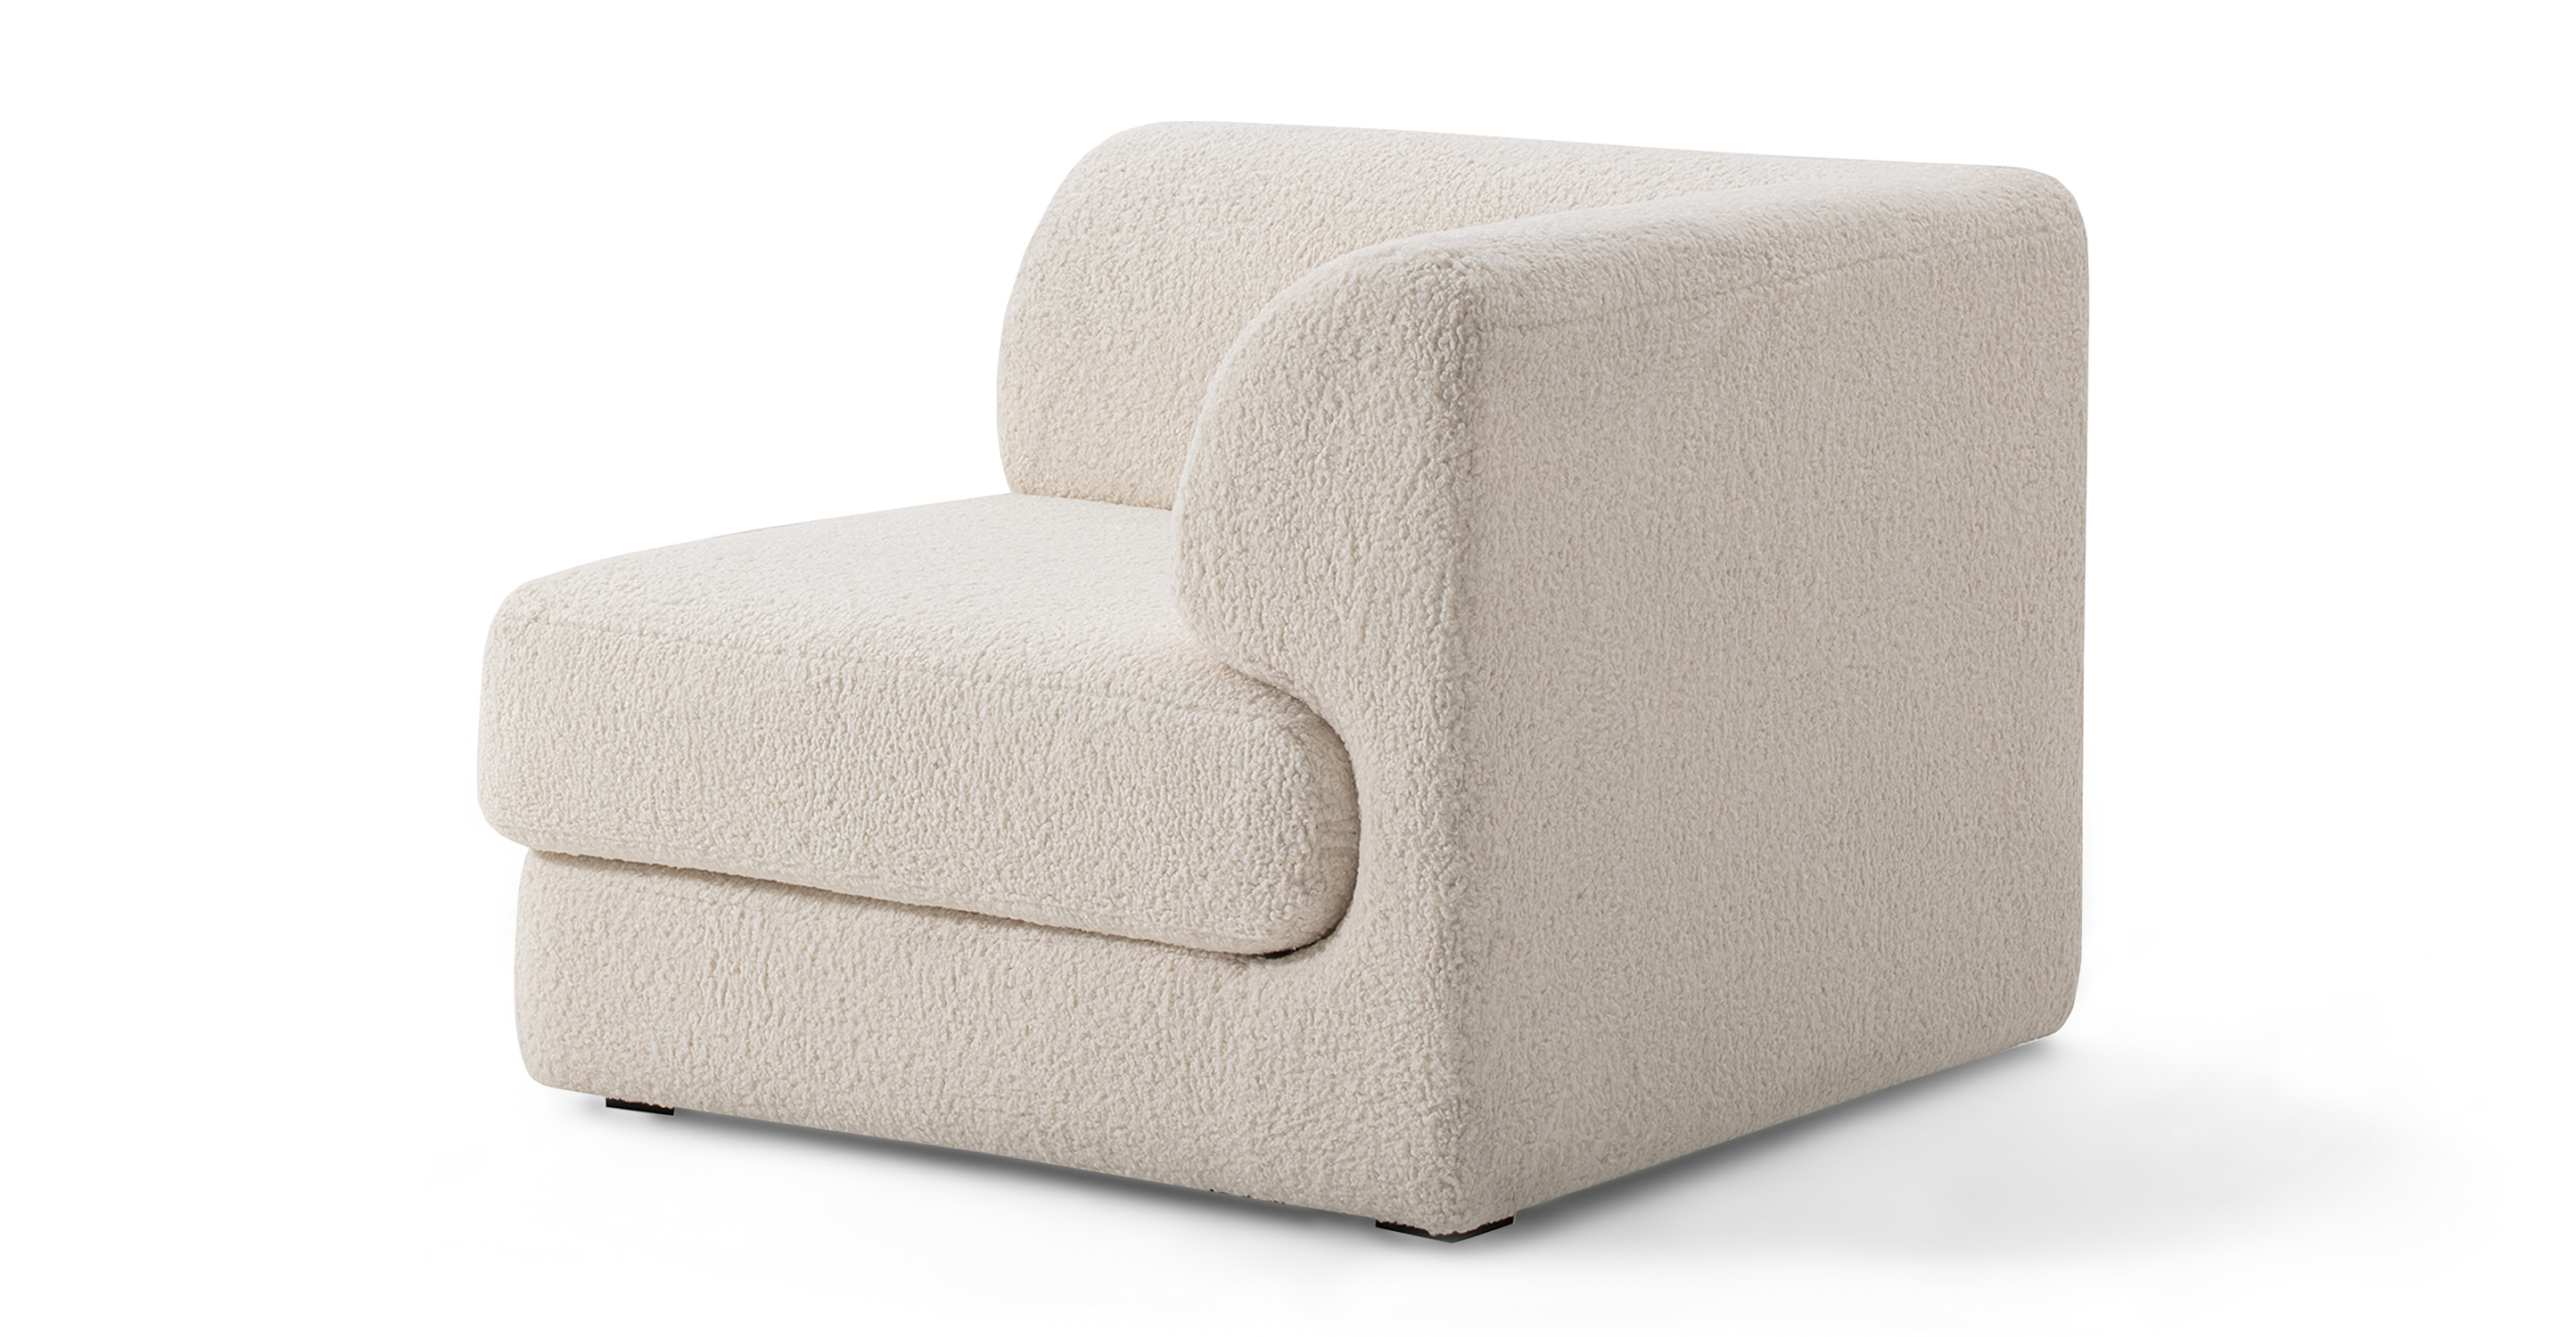 The Shelter series is a stunning and contemporary modular sofa with a sleek design, characterized by its low profile and elevated stance on slender black squared legs.
The Shelter seat cushion is curved at the back and fits into the chair back like a puzzle piece. Imaged is the Single arm or corner Shelter chair in Sheep Skin.